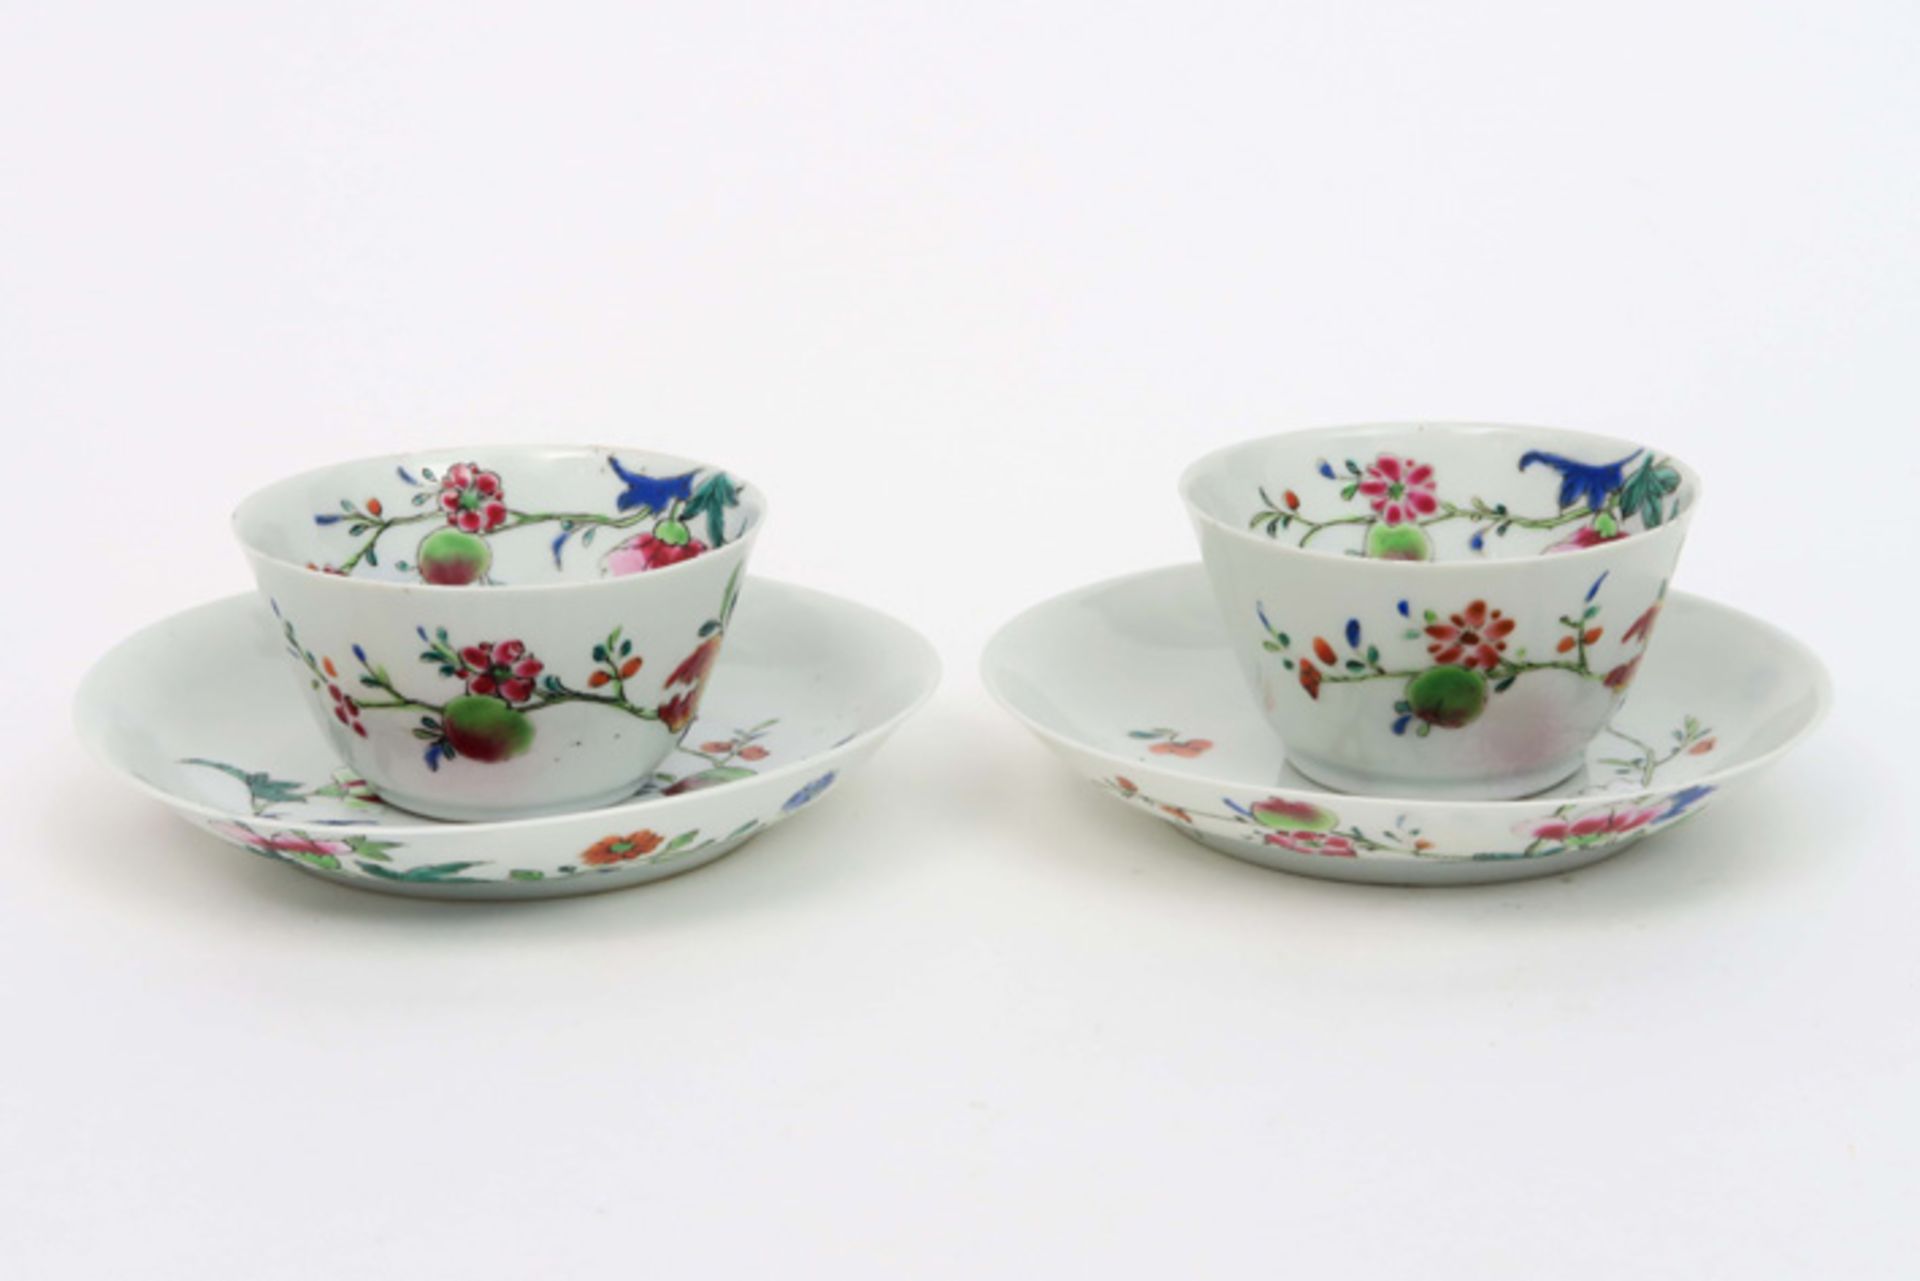 pair of 18th Cent. Chinese sets of cup and saucer in porcelain with a 'Famille Rose' flowers decor||